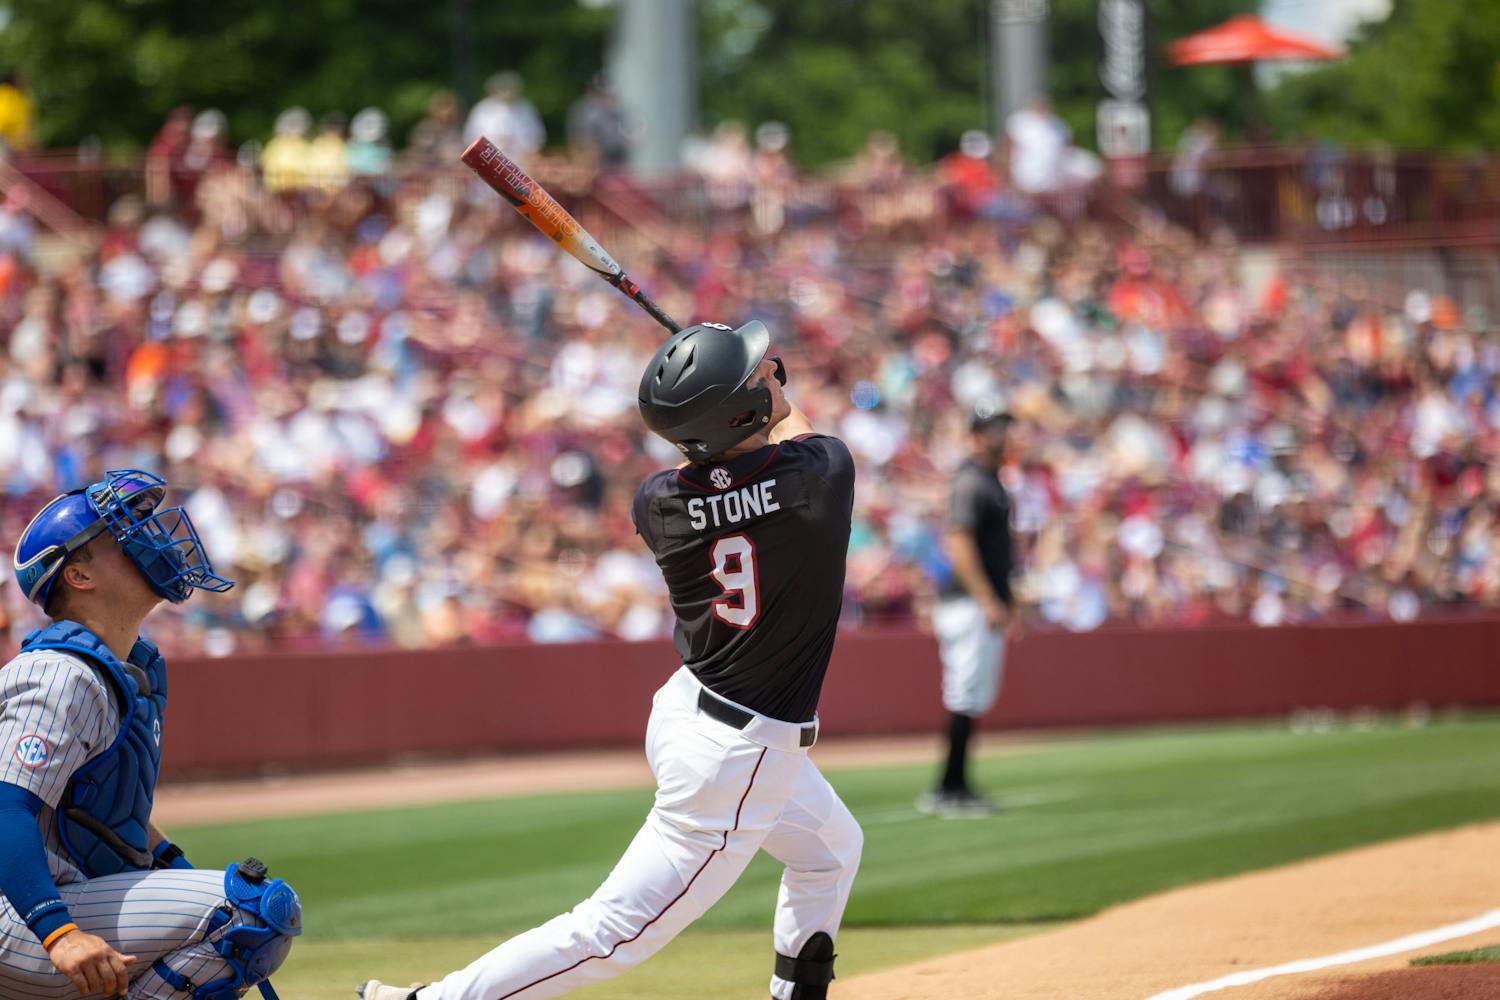 Sophomore outfielder Evan Stone tries to spot a batted ball during the series finale against the Gators on April 22, 2023. With a final score of 7-5, South Carolina won all three games over Florida in the series.